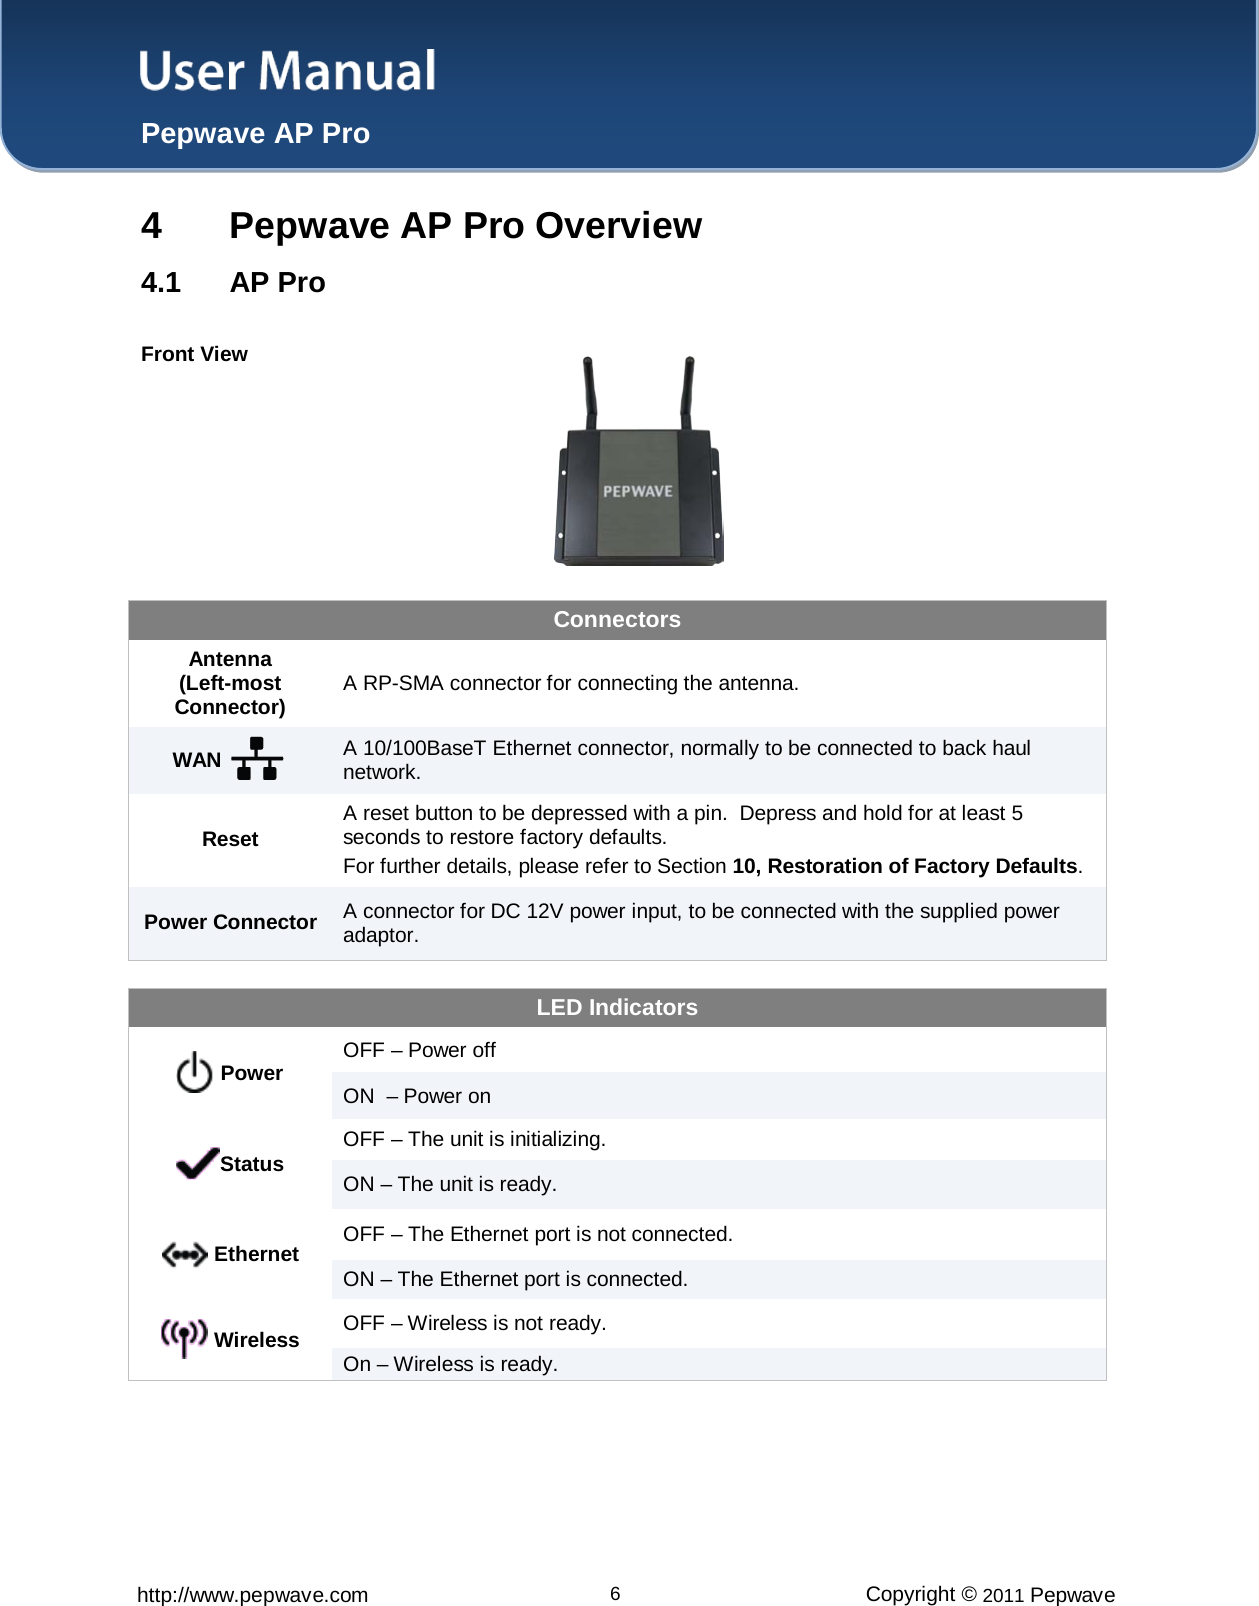 User Manual  Pepwave AP Pro http://www.pepwave.com 6 Copyright © 2011 Pepwave  4  Pepwave AP Pro Overview 4.1 AP Pro  Front View       Connectors Antenna  (Left-most Connector) A RP-SMA connector for connecting the antenna. WAN   A 10/100BaseT Ethernet connector, normally to be connected to back haul network. Reset A reset button to be depressed with a pin.  Depress and hold for at least 5 seconds to restore factory defaults. For further details, please refer to Section 10, Restoration of Factory Defaults. Power Connector A connector for DC 12V power input, to be connected with the supplied power adaptor.  LED Indicators  Power OFF – Power off ON  – Power on Status  OFF – The unit is initializing. ON – The unit is ready.  Ethernet OFF – The Ethernet port is not connected. ON – The Ethernet port is connected.  Wireless OFF – Wireless is not ready. On – Wireless is ready.  